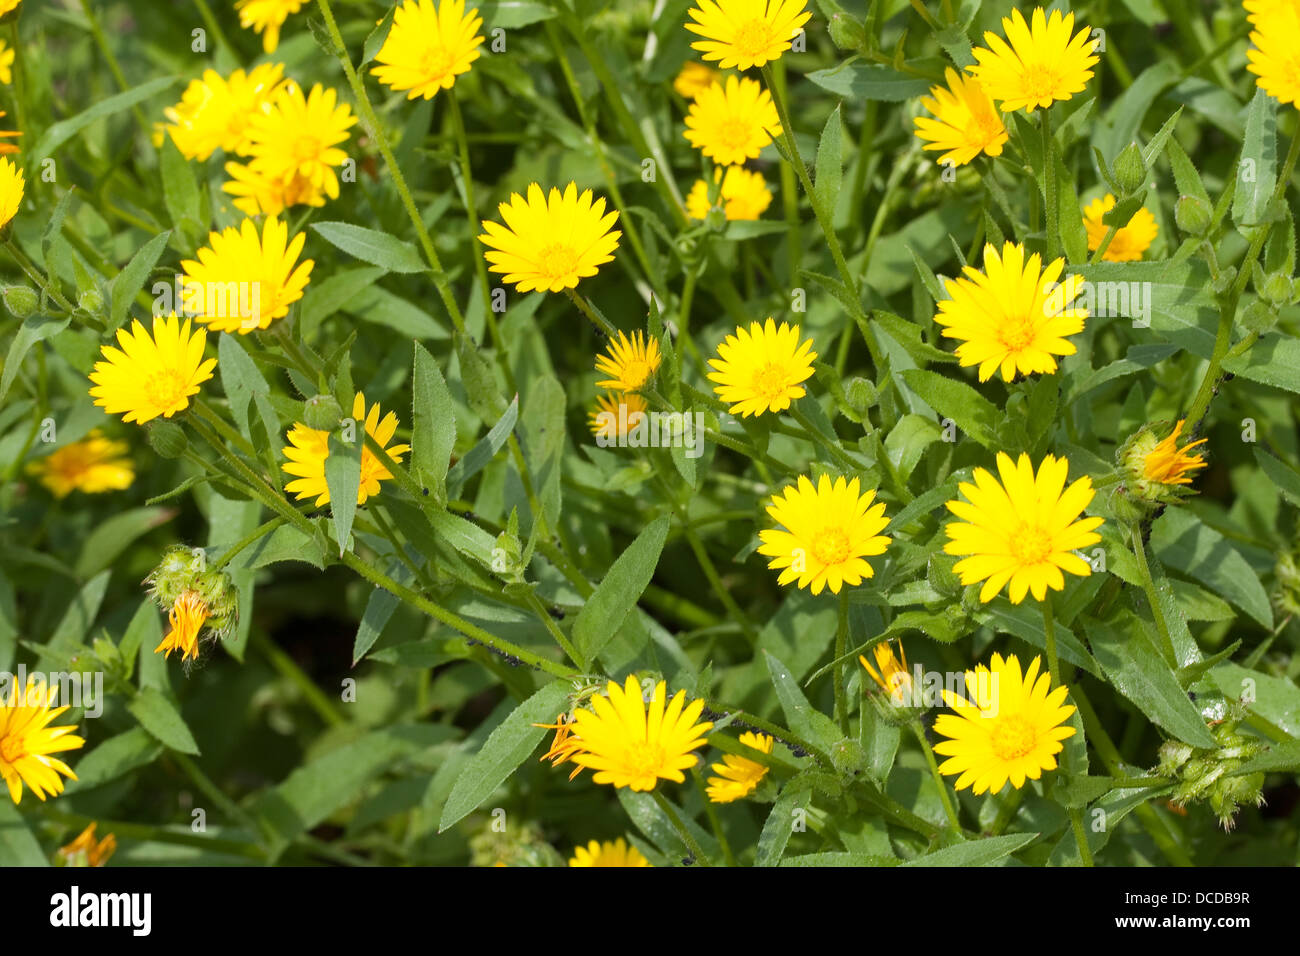 Acker-Ringelblume, Ackerringelblume, Ringelblume, Calendula arvensis, field marigold, field marygold Stock Photo